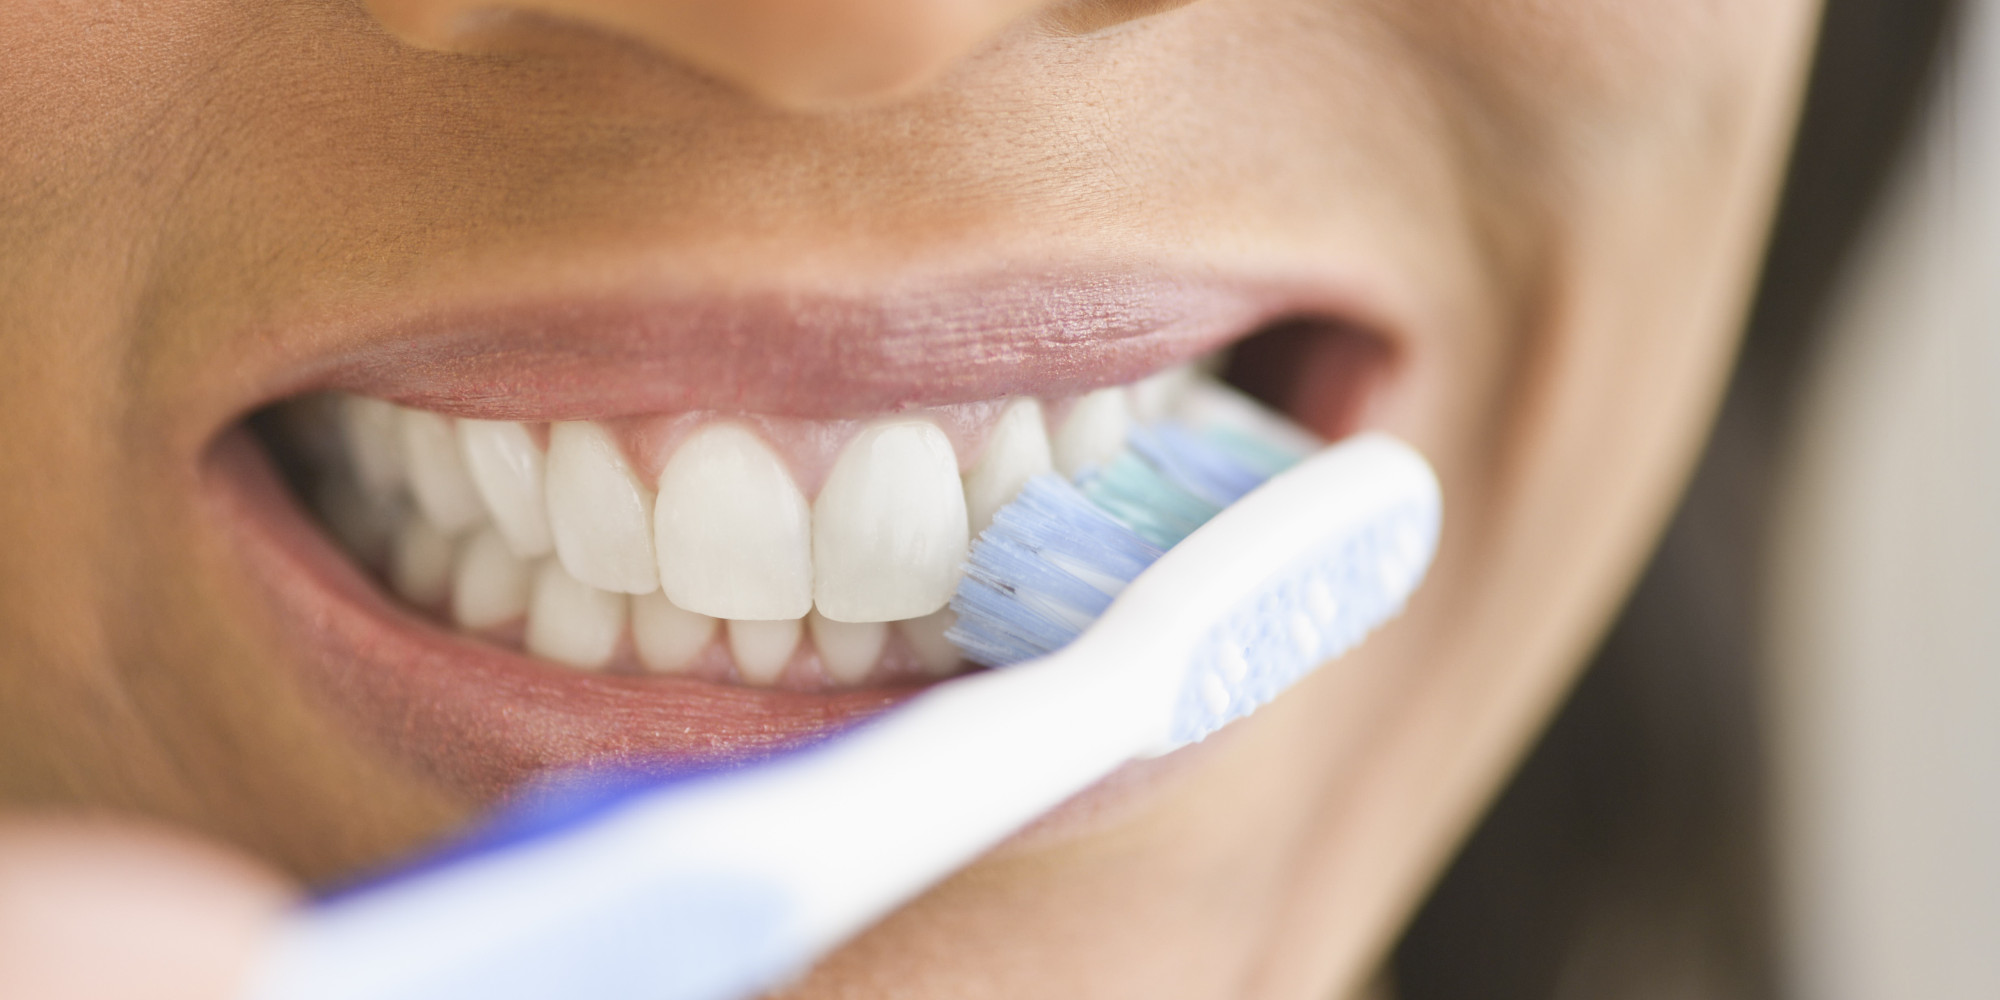 Could Brushing Right After A Meal Be Bad For Your Teeth? | HuffPost